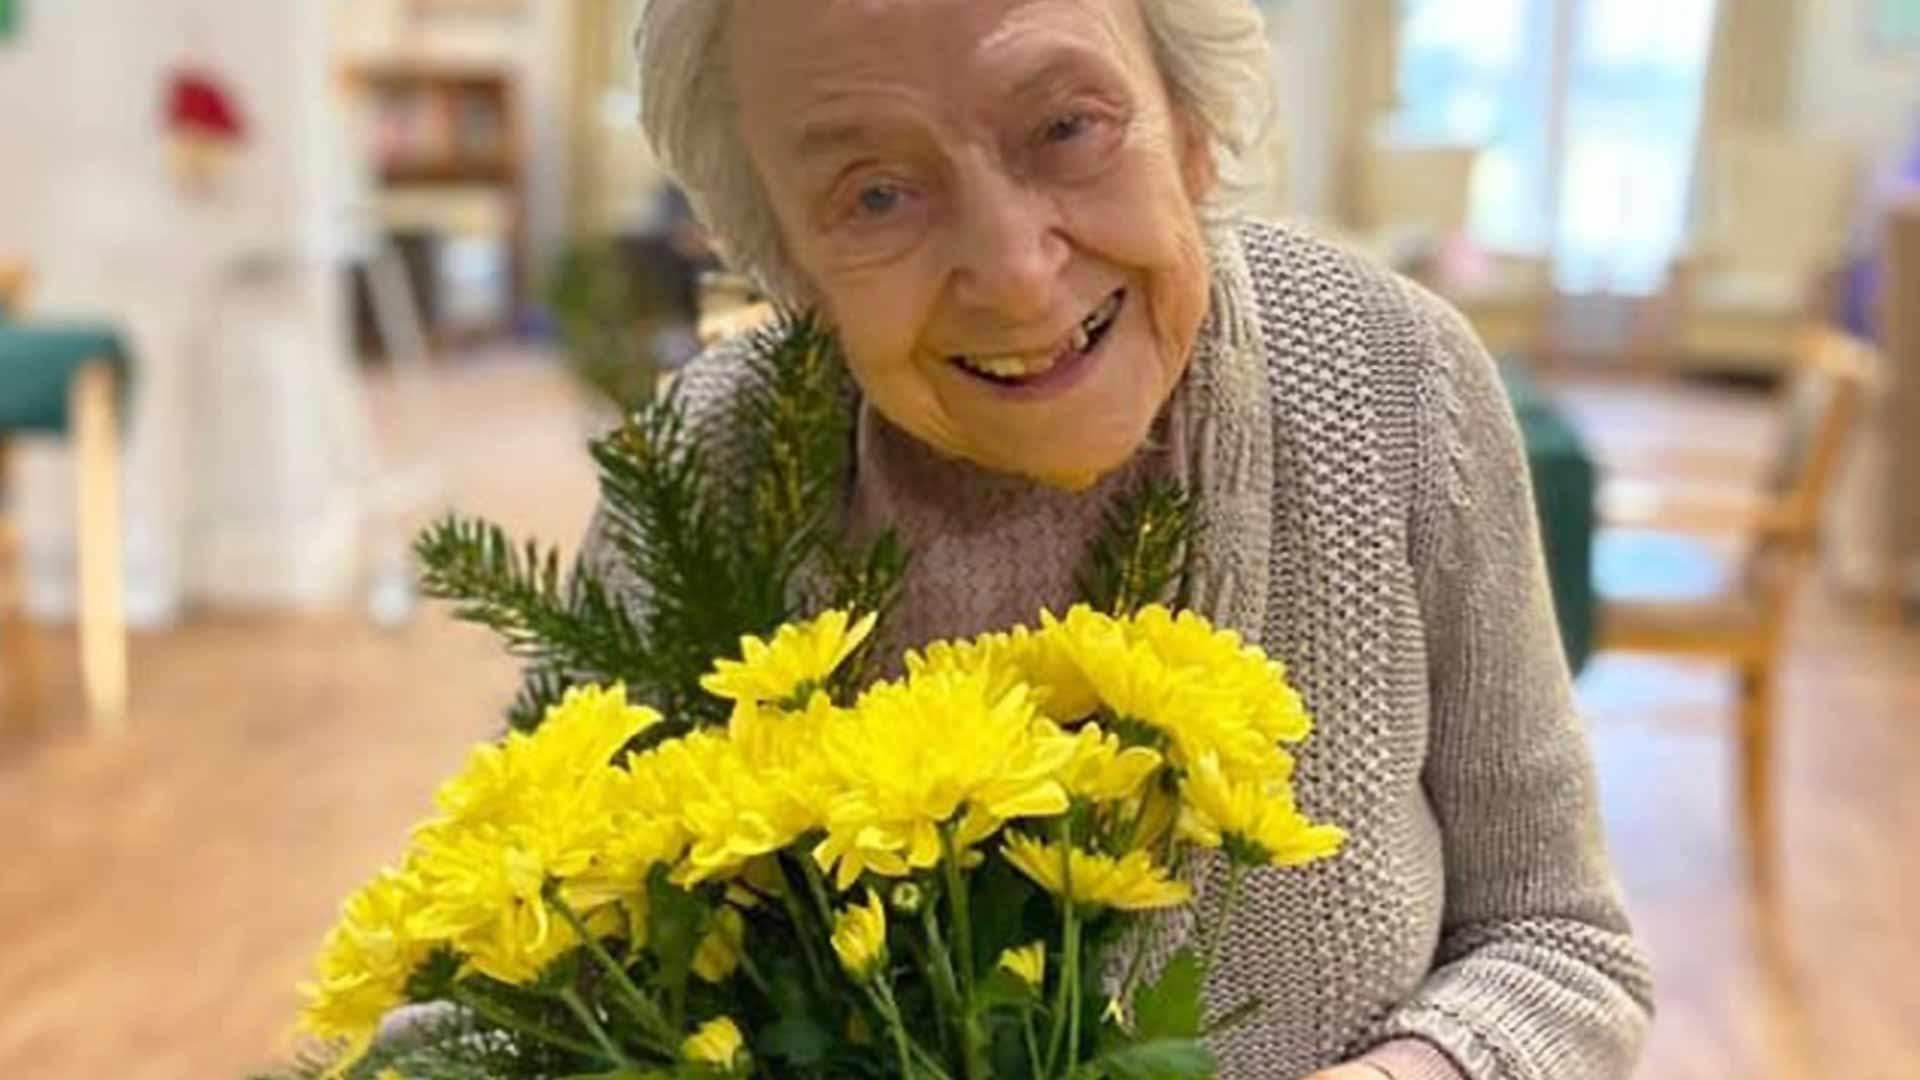 resident holding some flowers